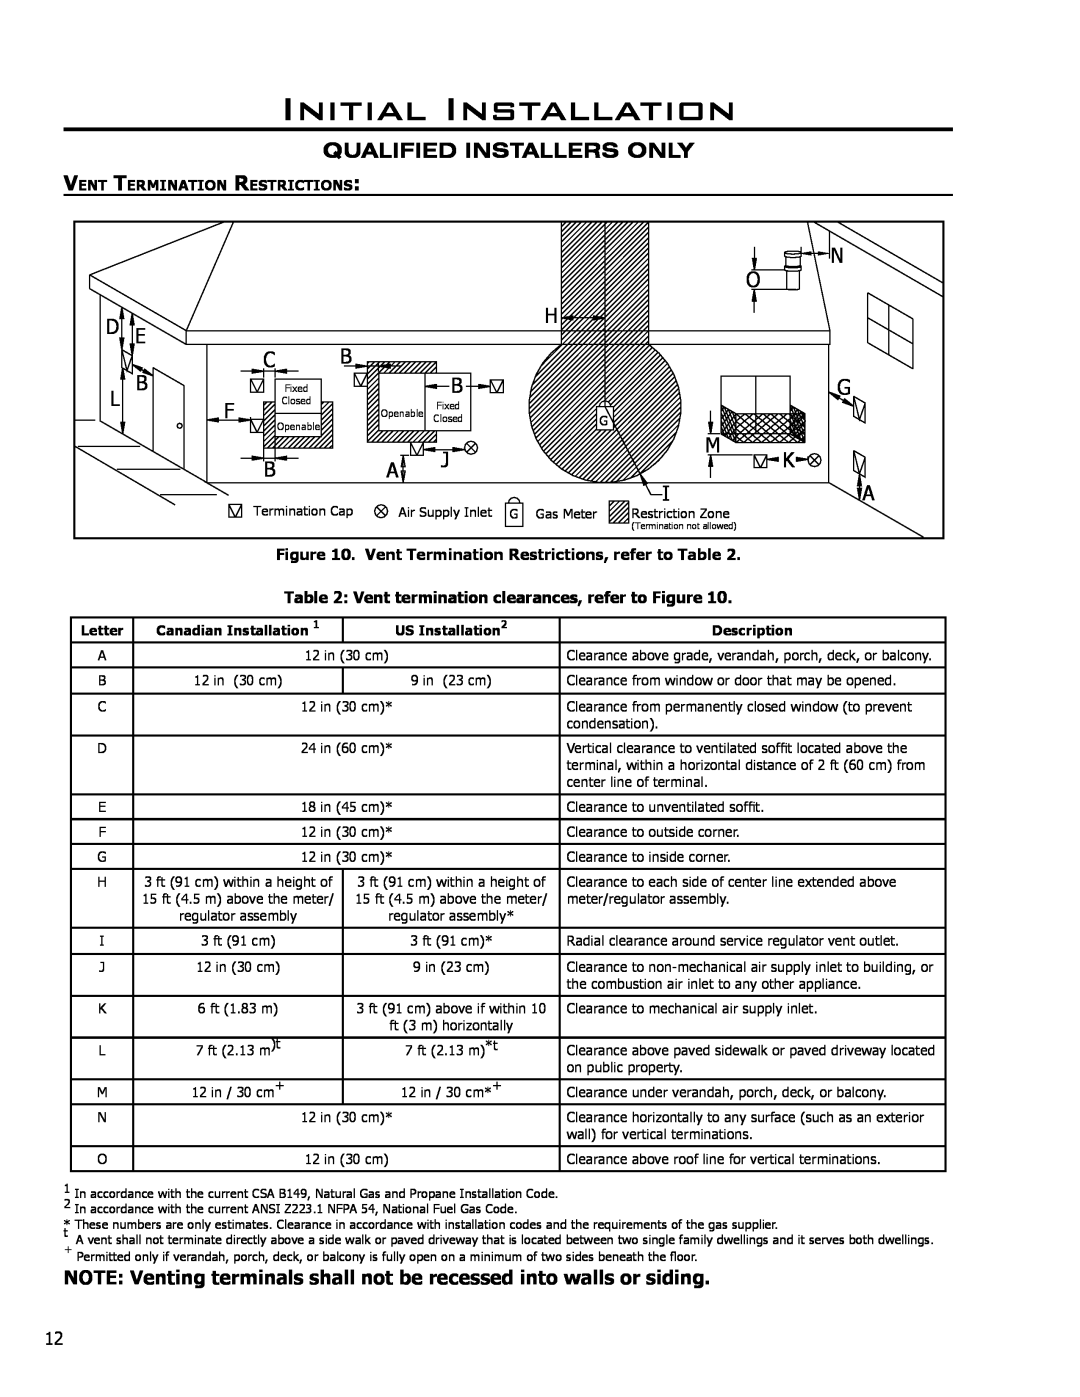 Enviro C-10794 owner manual Initial Installation, Qualified Installers Only 